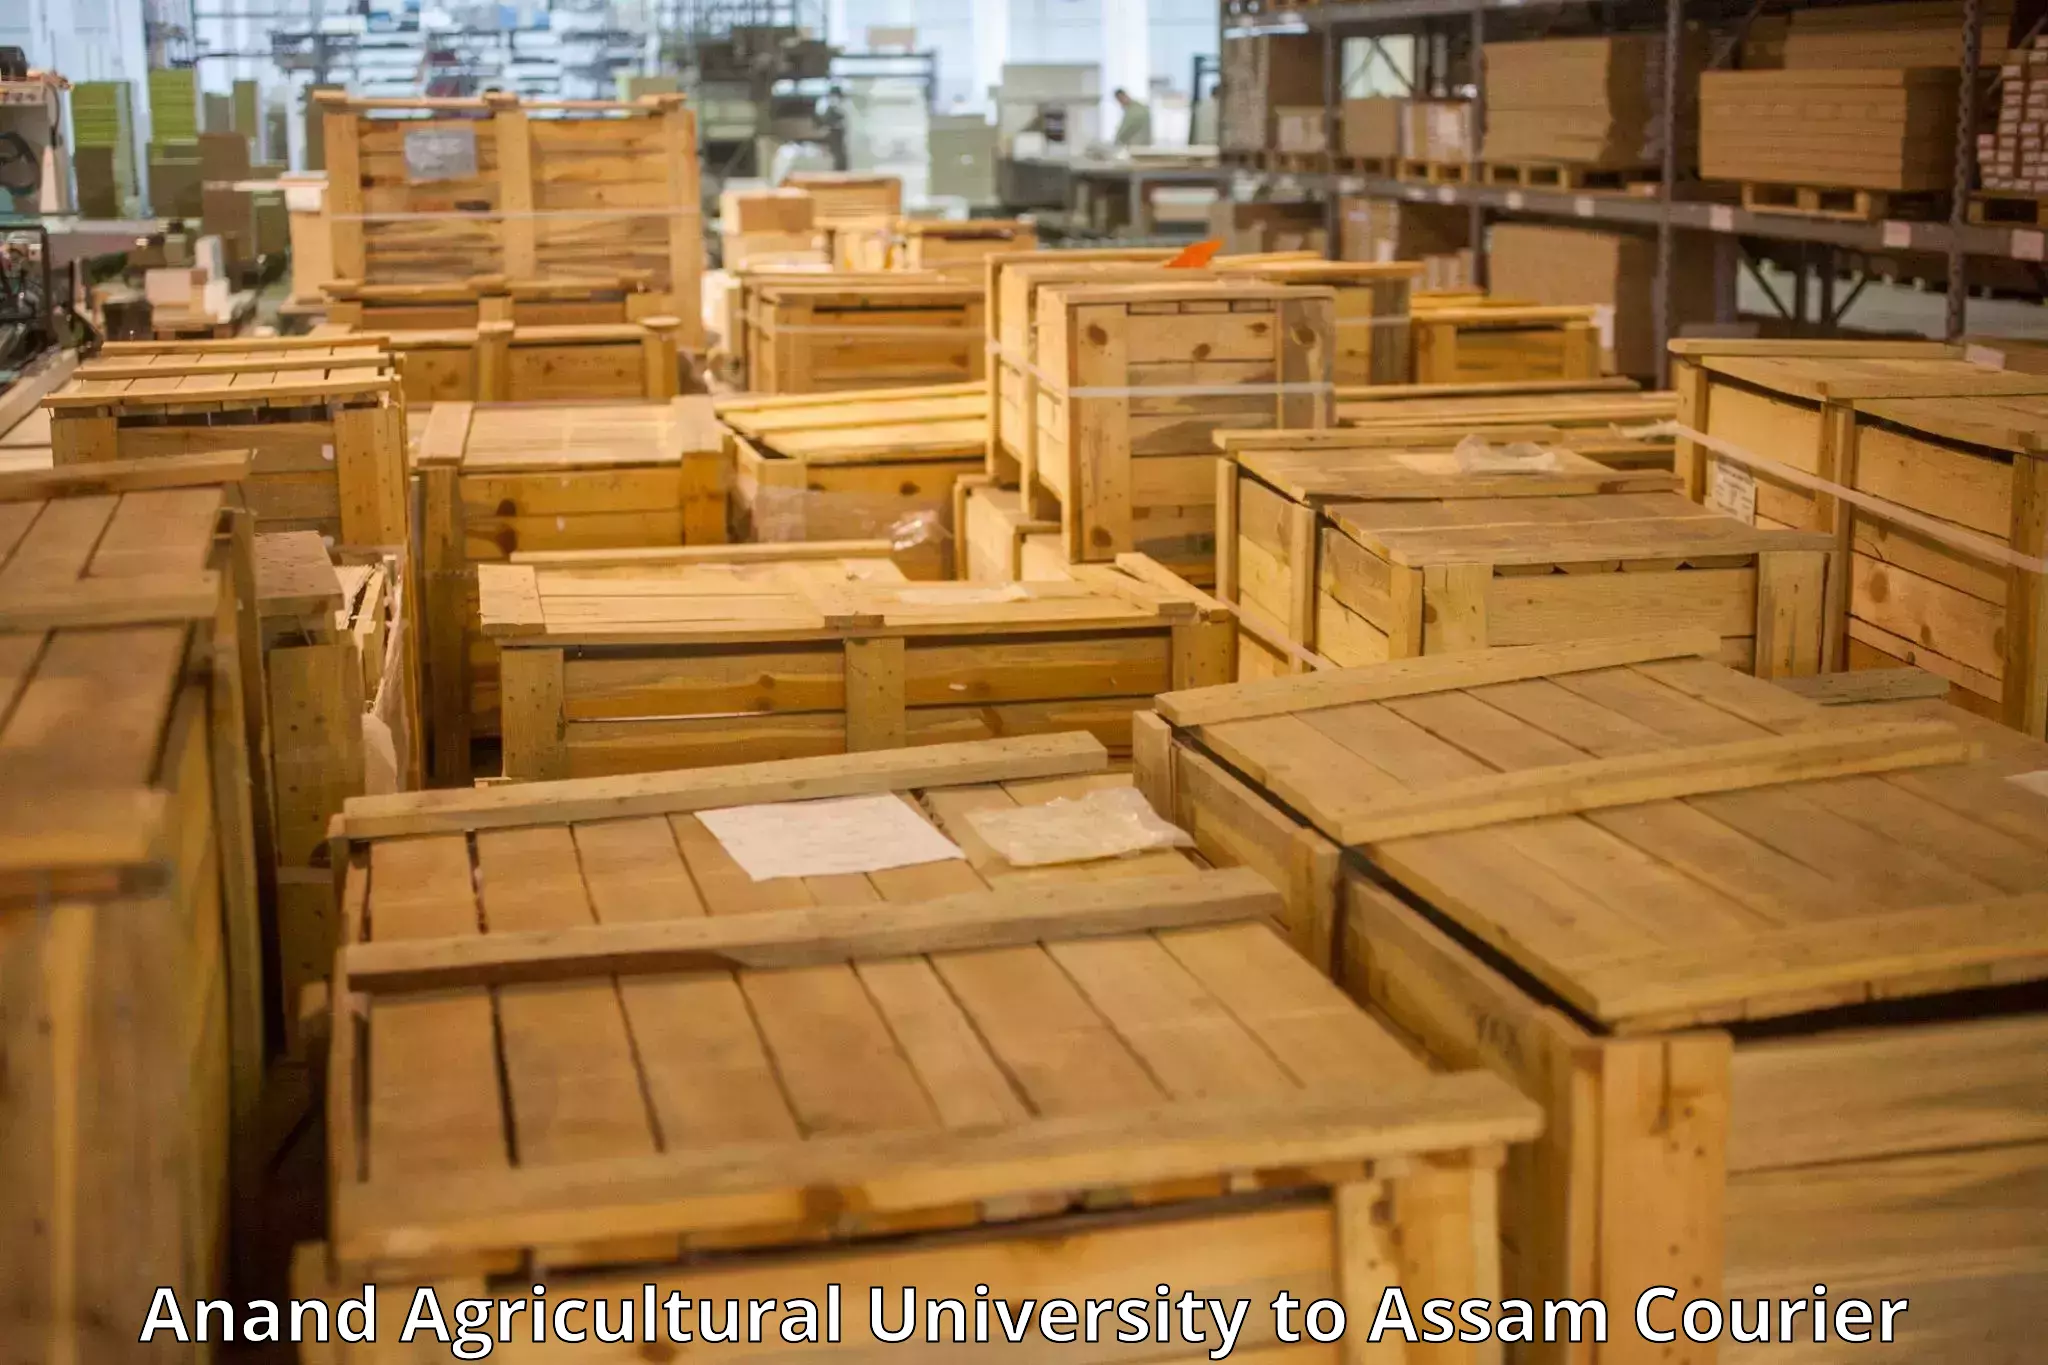 Heavy luggage shipping Anand Agricultural University to Hajo